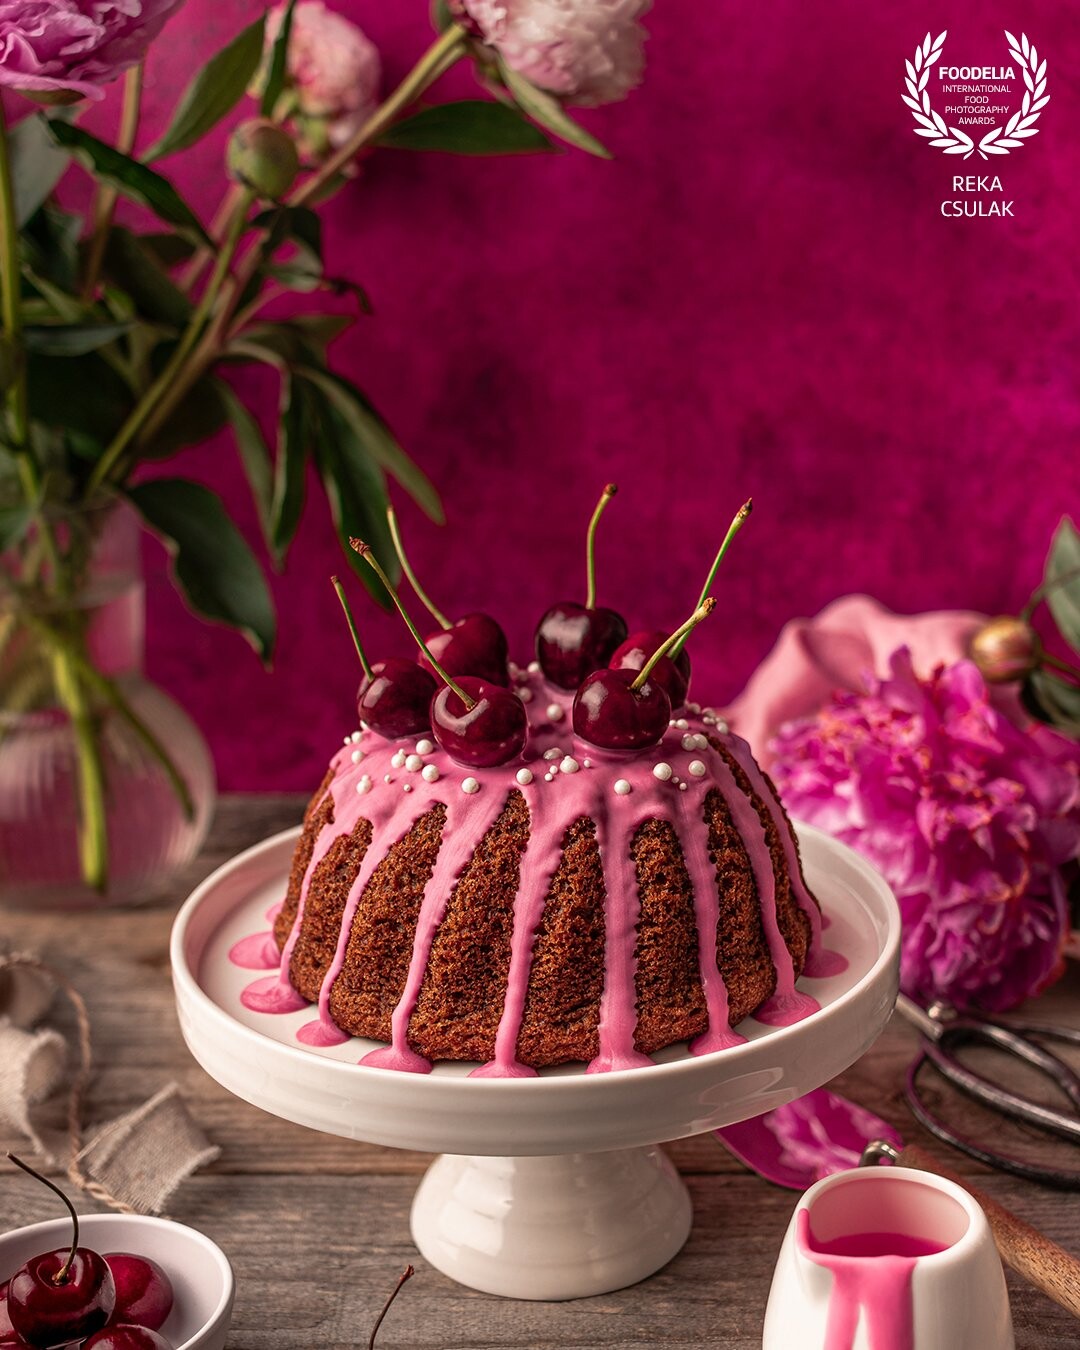 Delicious bundt cake with cherries and candy melts in the embrace of peonies and different shades and textures of pink, created as part of a visual update for my website.